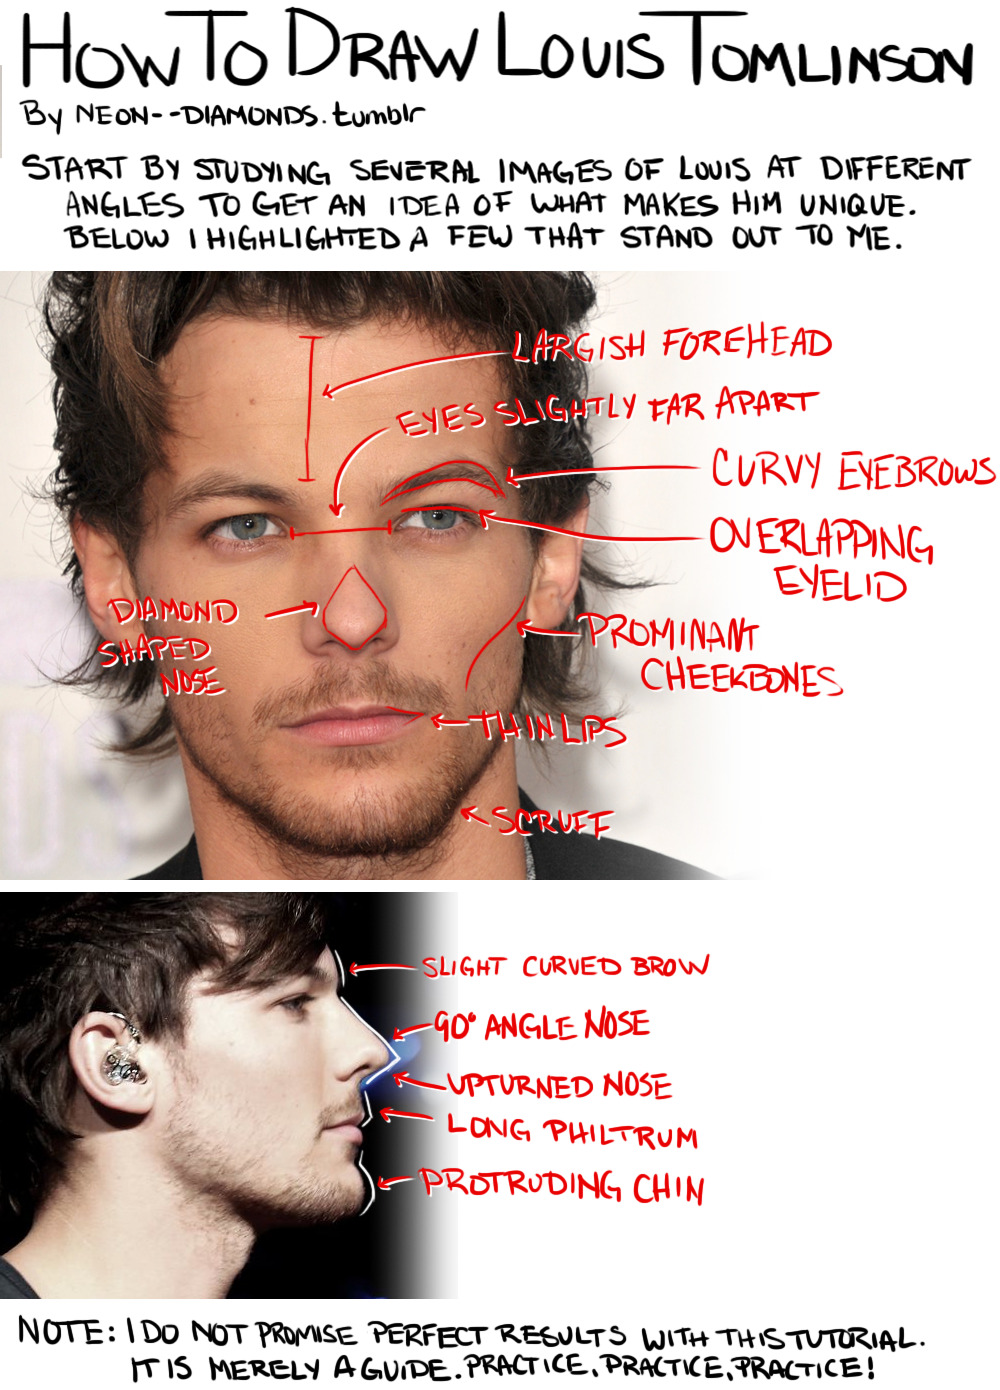 How To Draw Louis Tomlinson, Louis Tomlinson, Step by Step